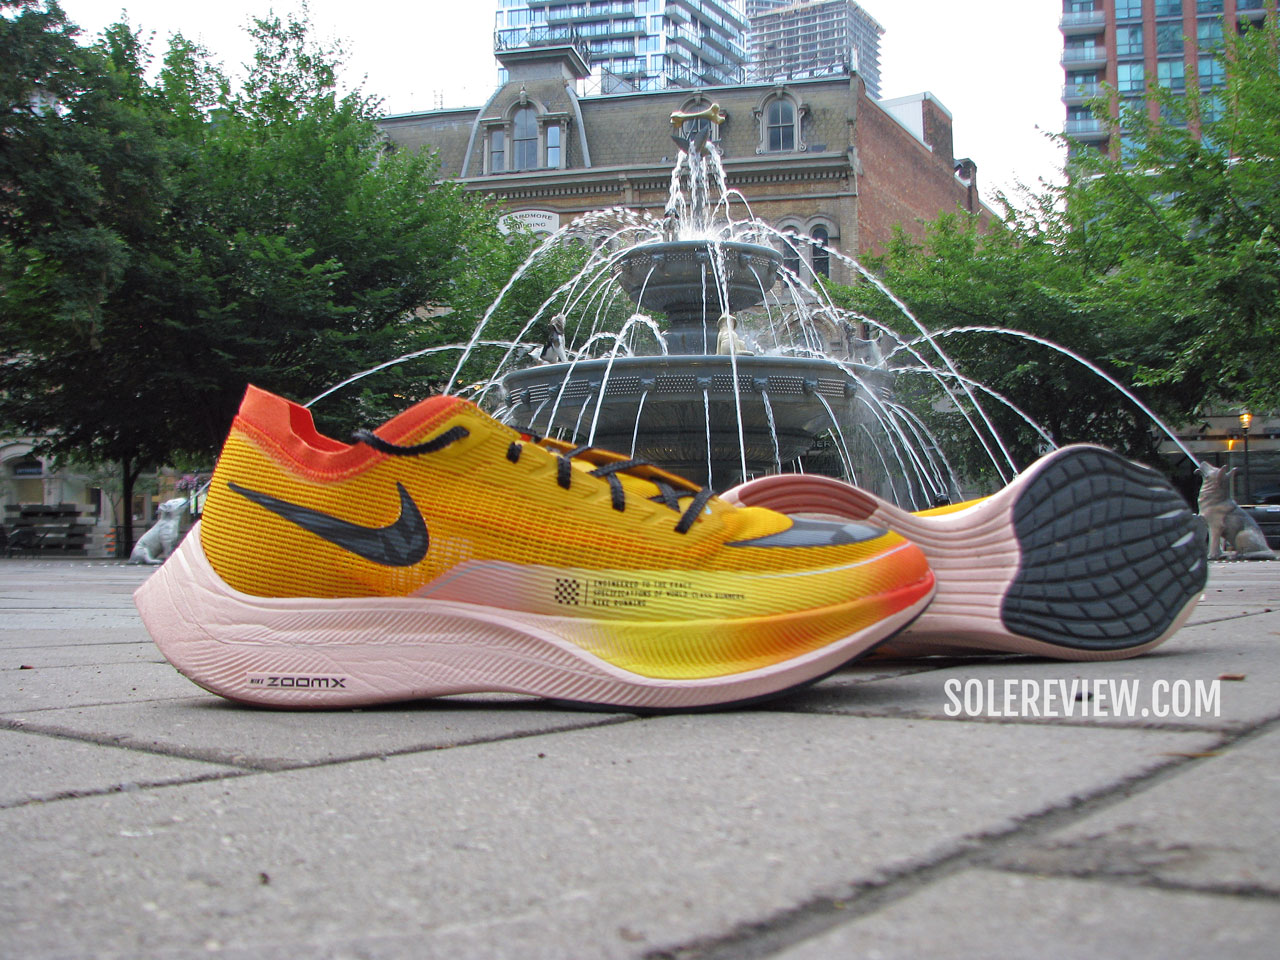 Nike Vaporfly Next% 2 in a park.